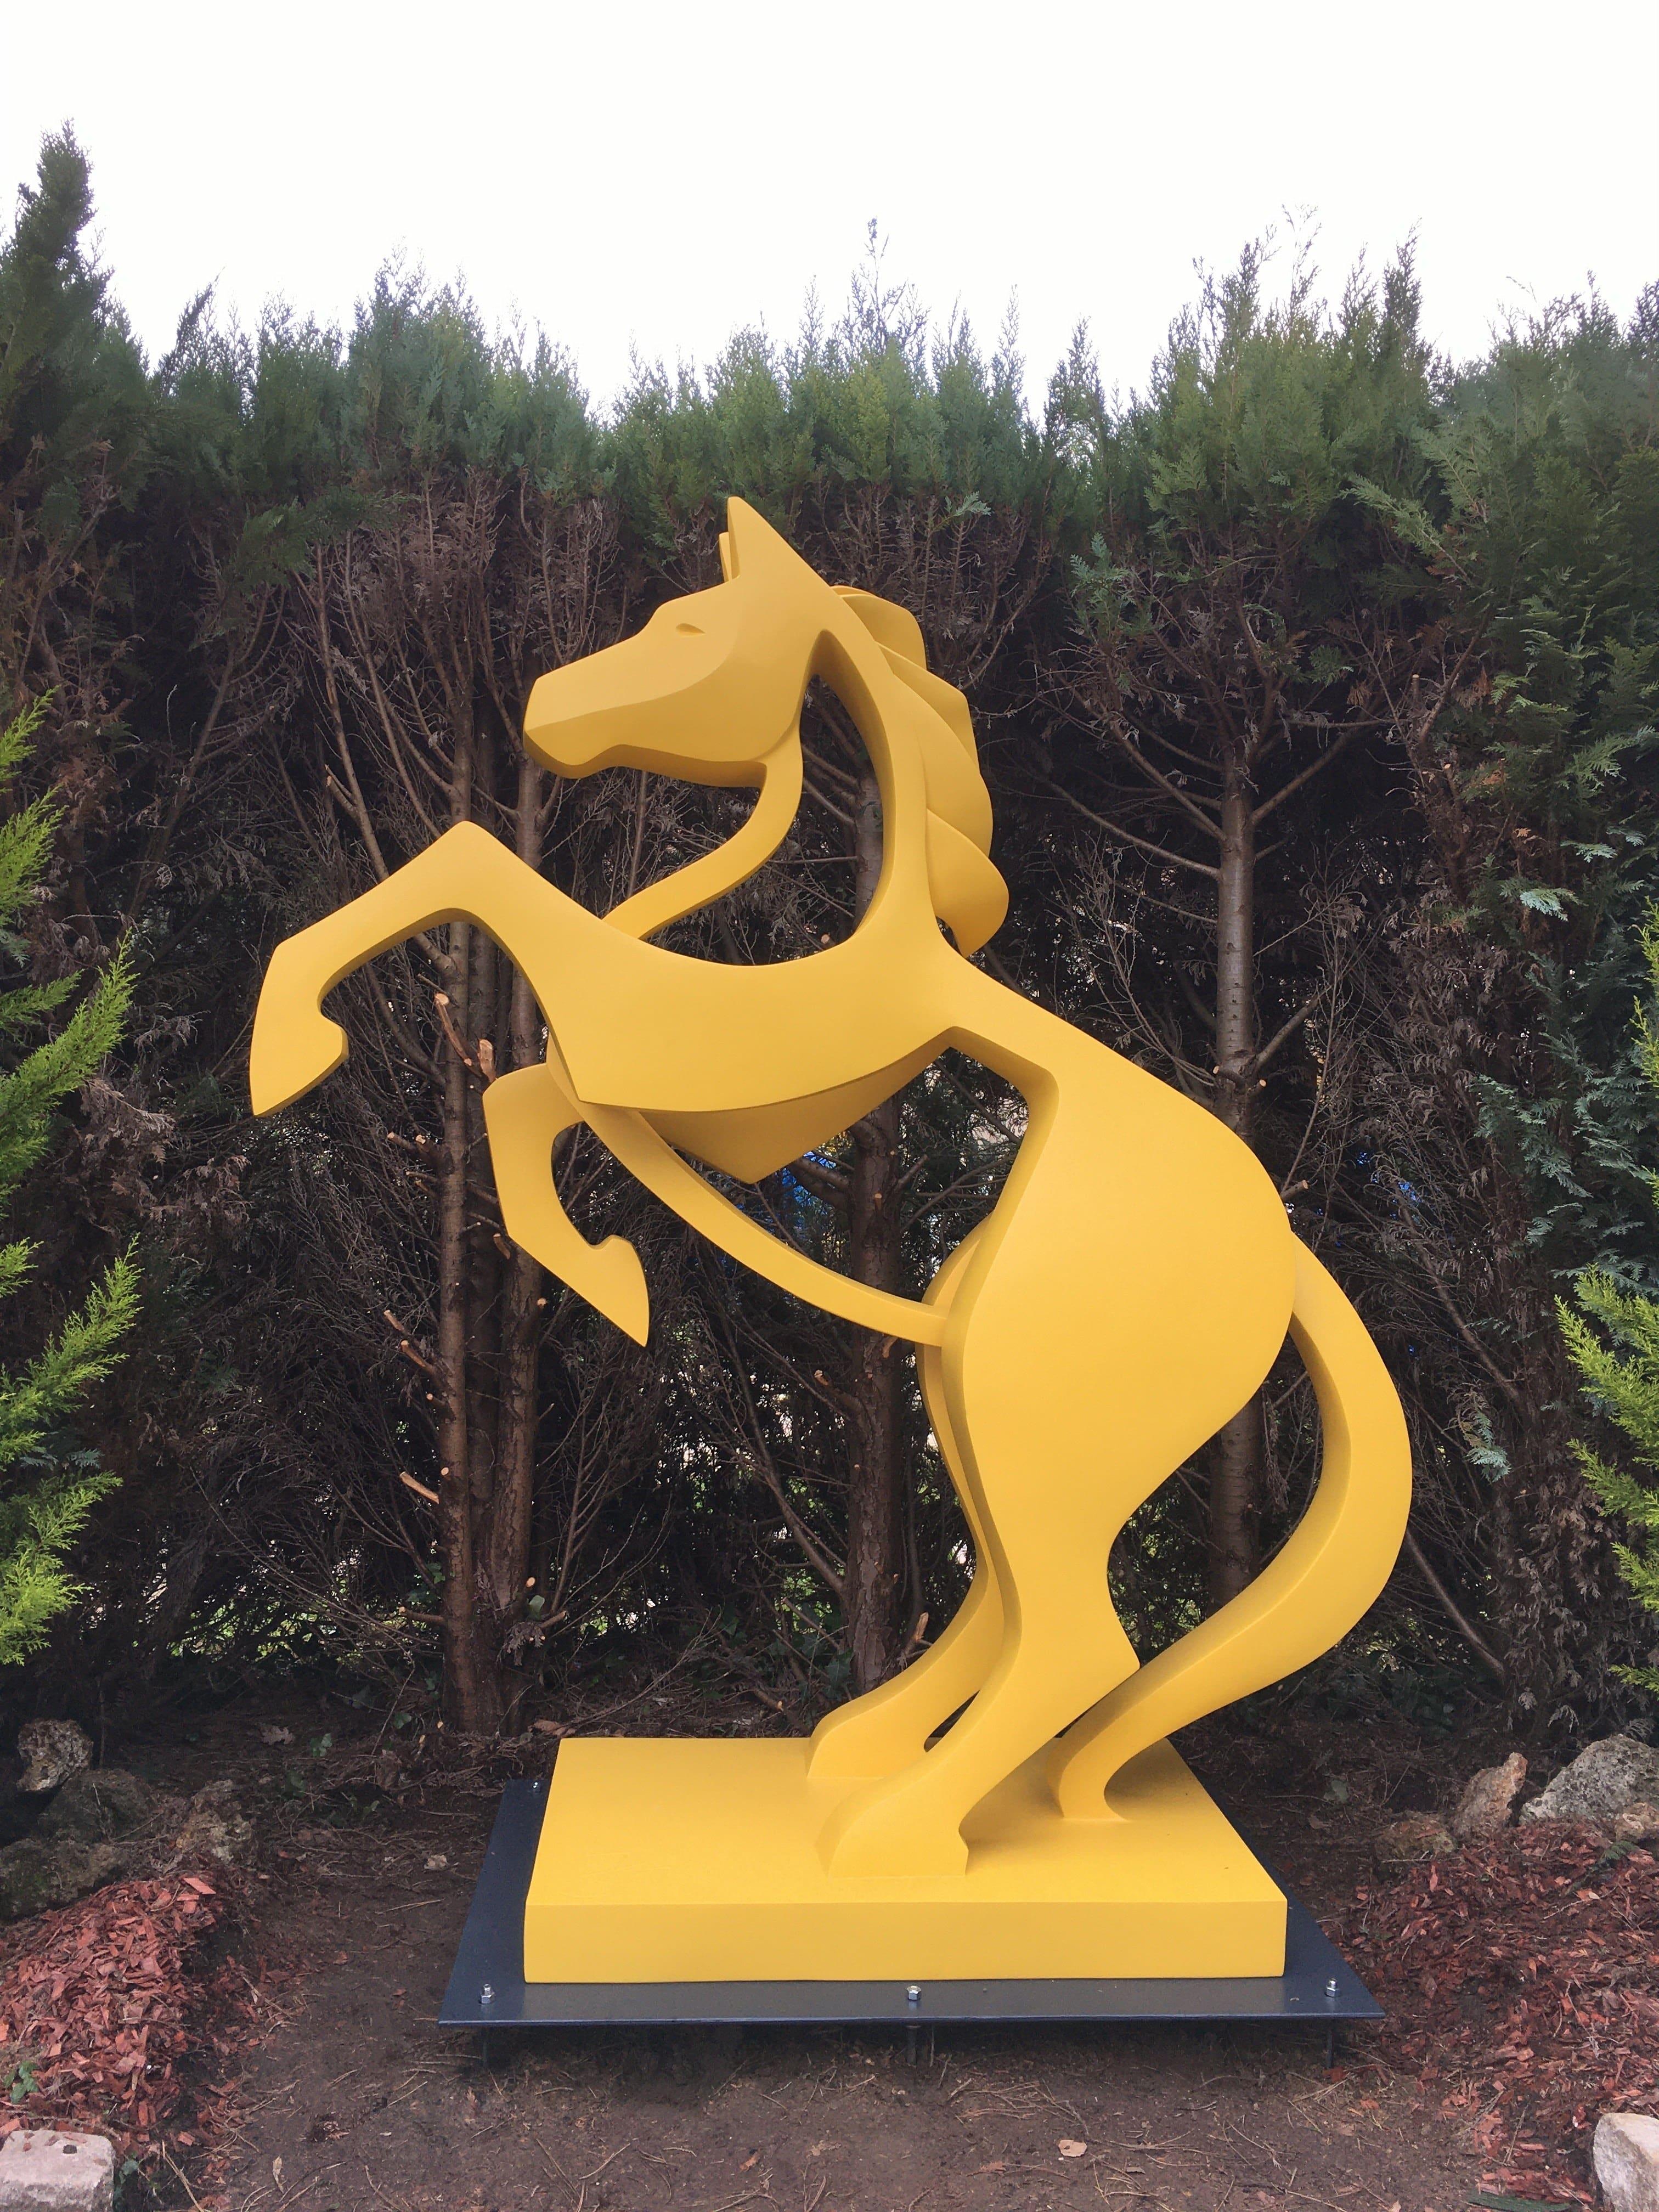 large outdoor horse statue for sale